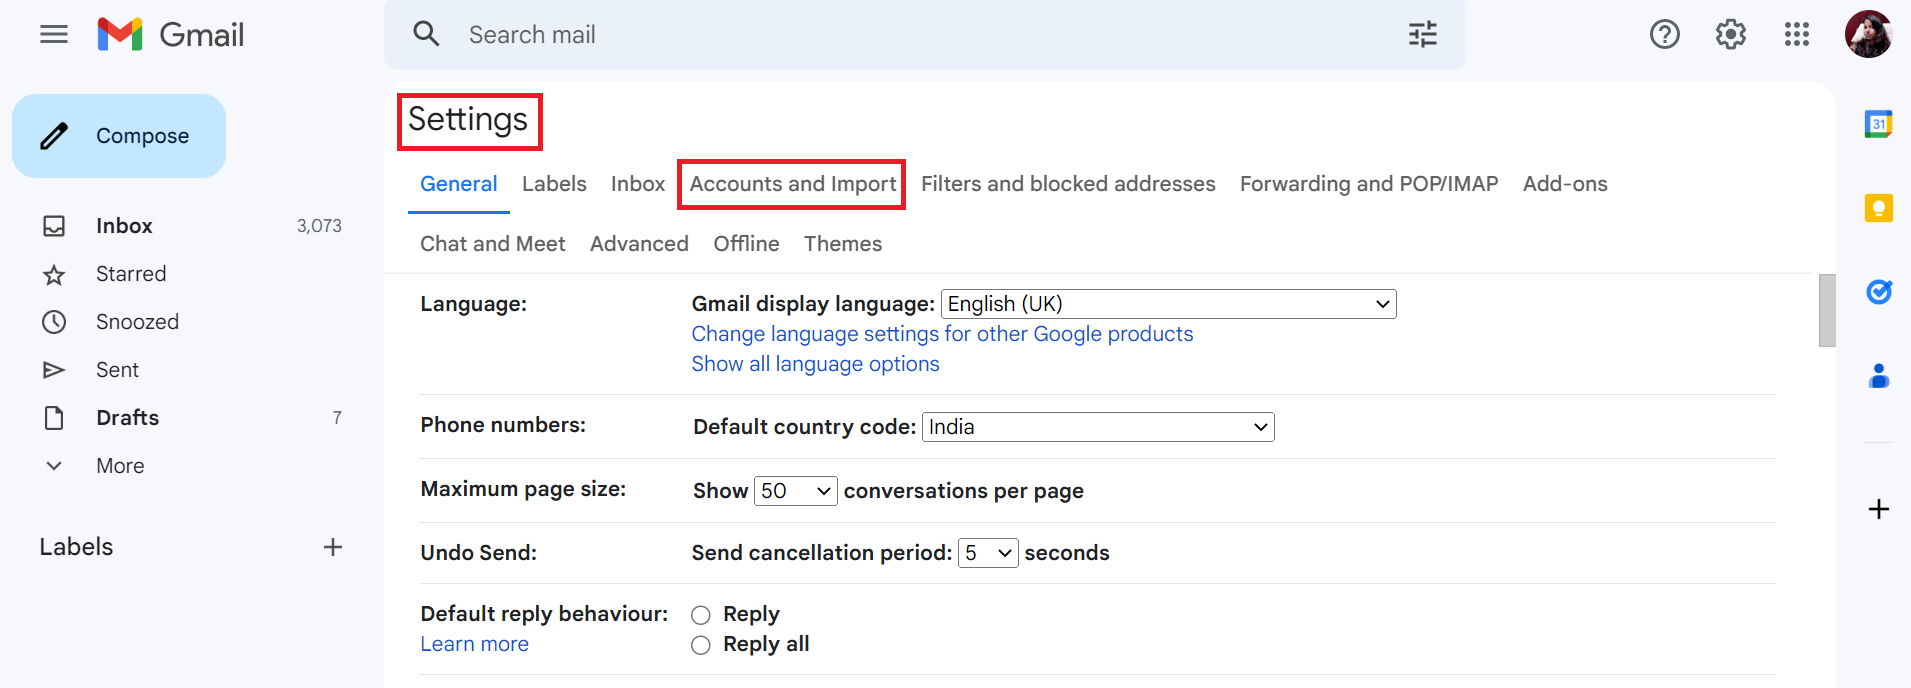 Accounts & Import to Transfer Yahoo Emails to Gmail